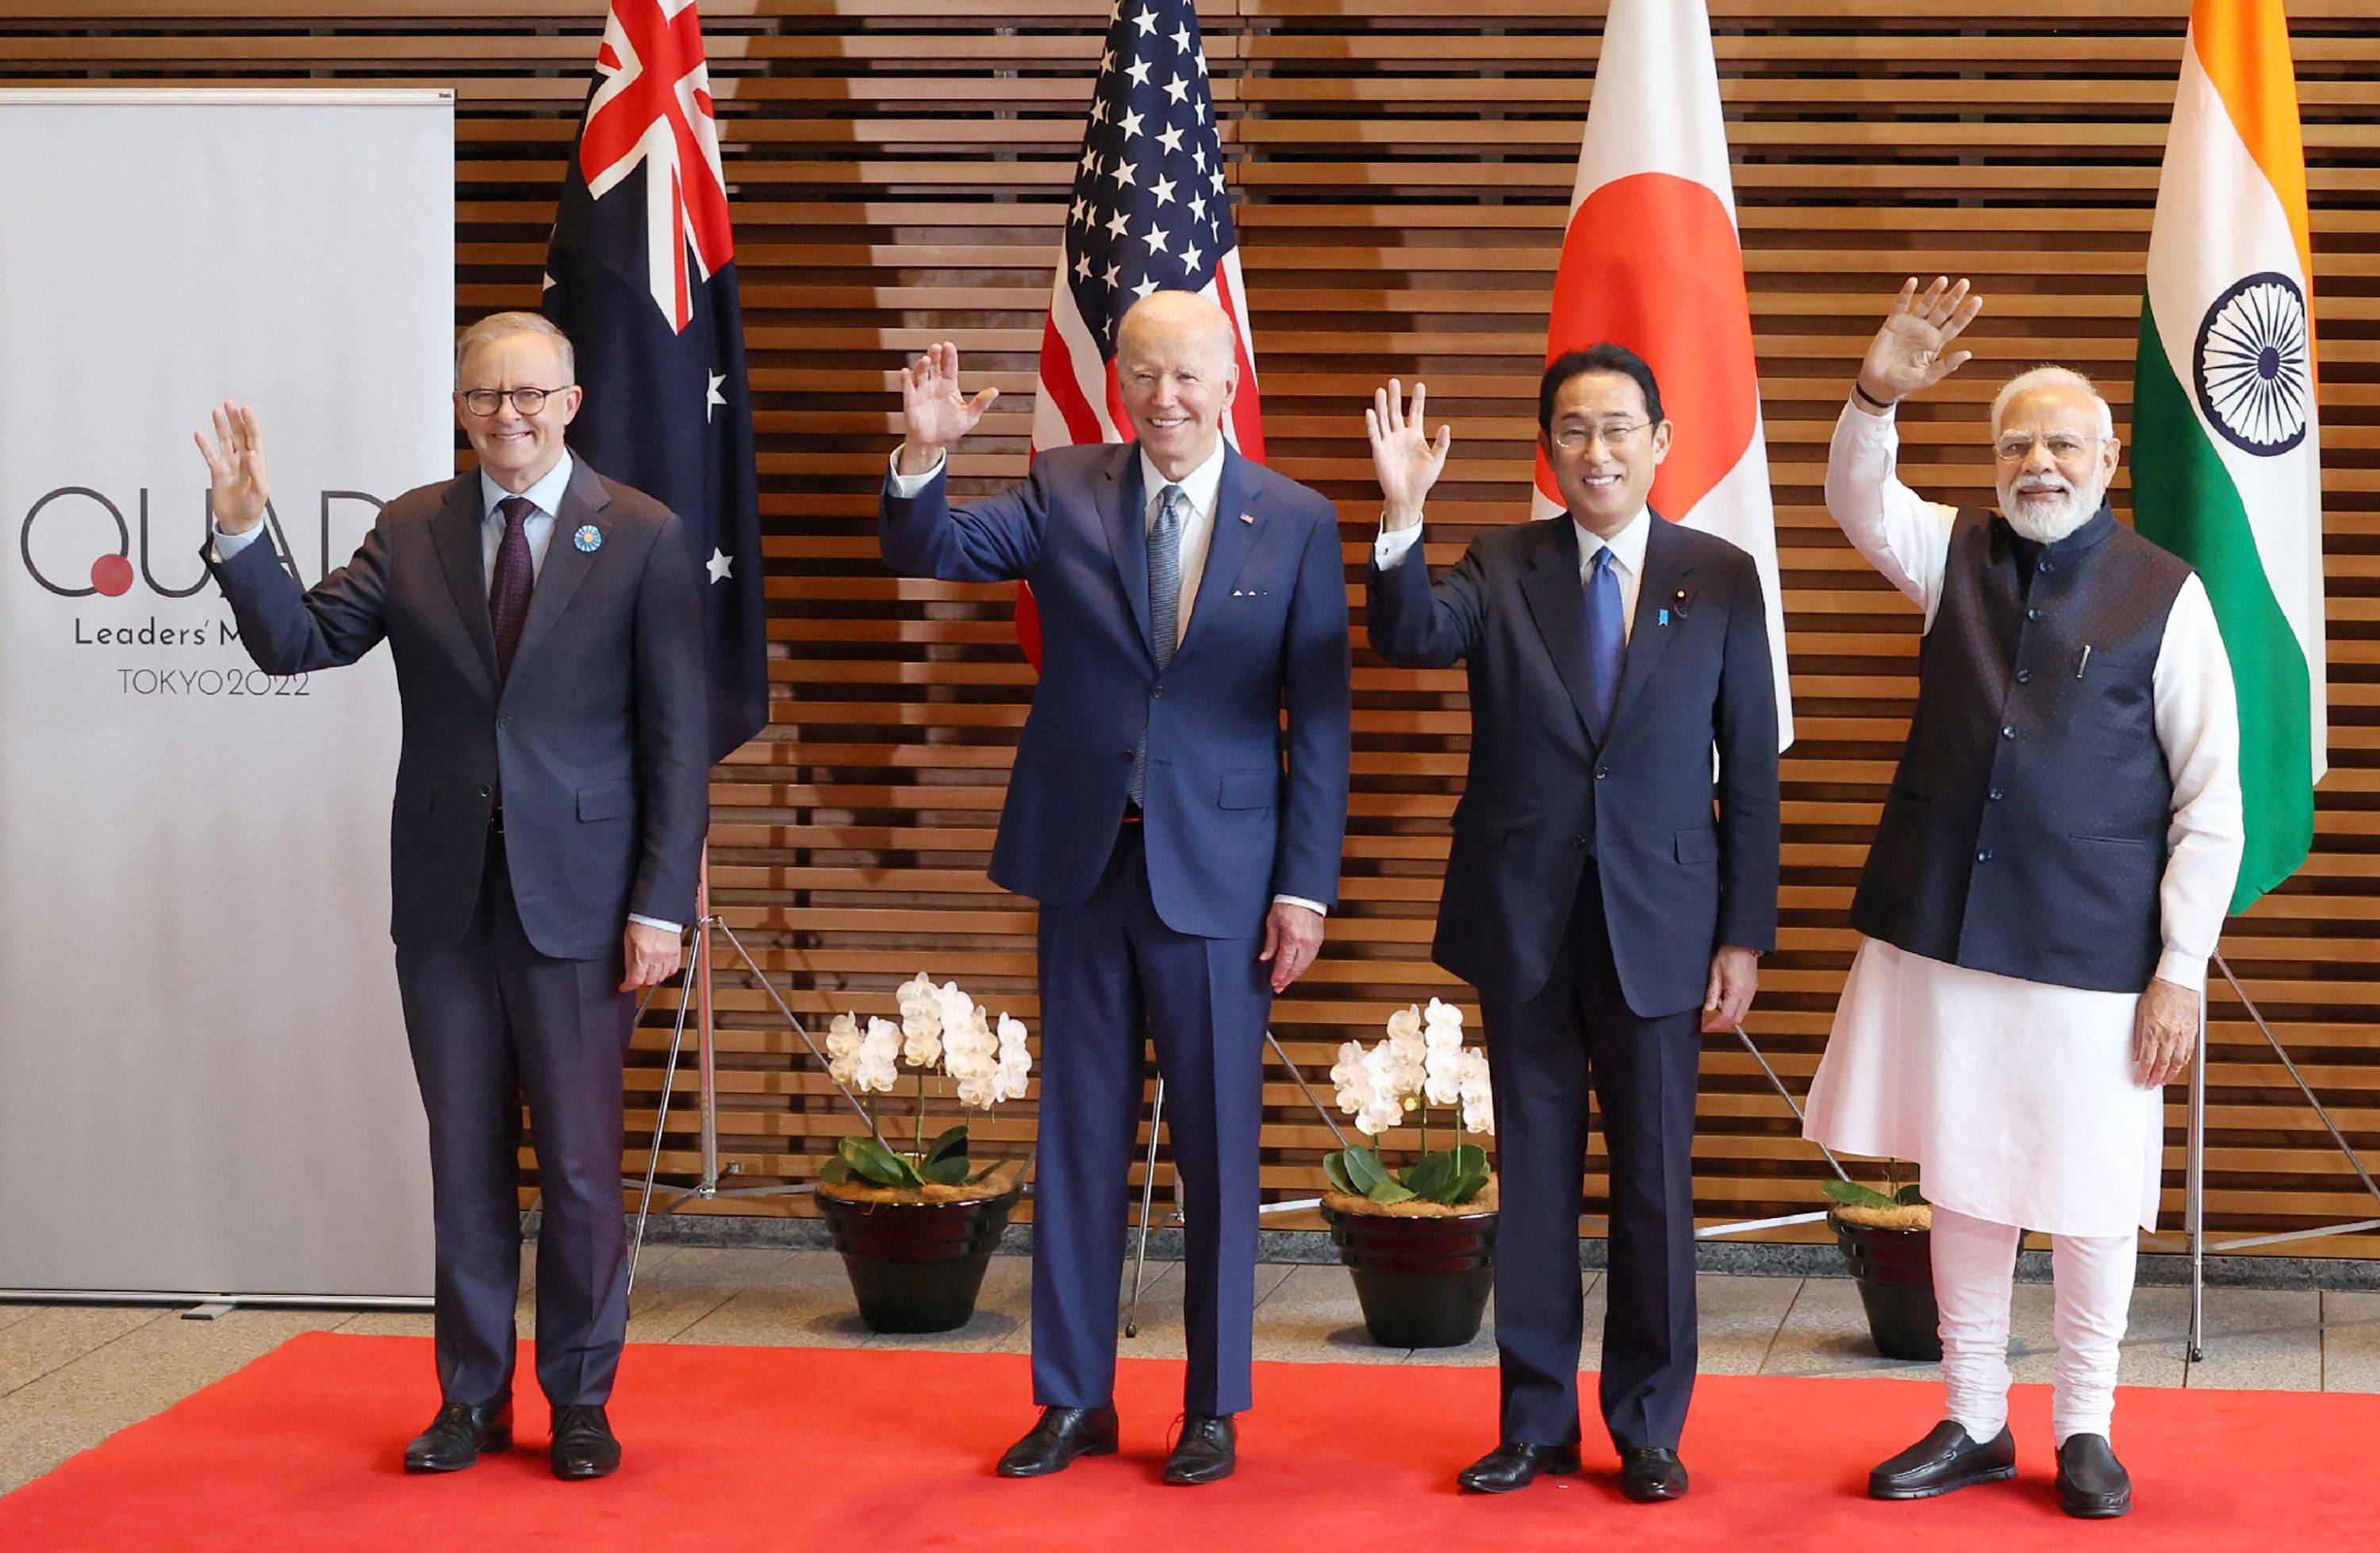 (From left) Australian Prime Minister Anthony Albanese, U.S. President Joe Biden, Prime Minister Fumio Kishida and Indian Prime Minister Narendra Modi wave to the media prior to 'the Quad' meeting at Kishida's office in Tokyo on Tuesday. | AFP-JIJI